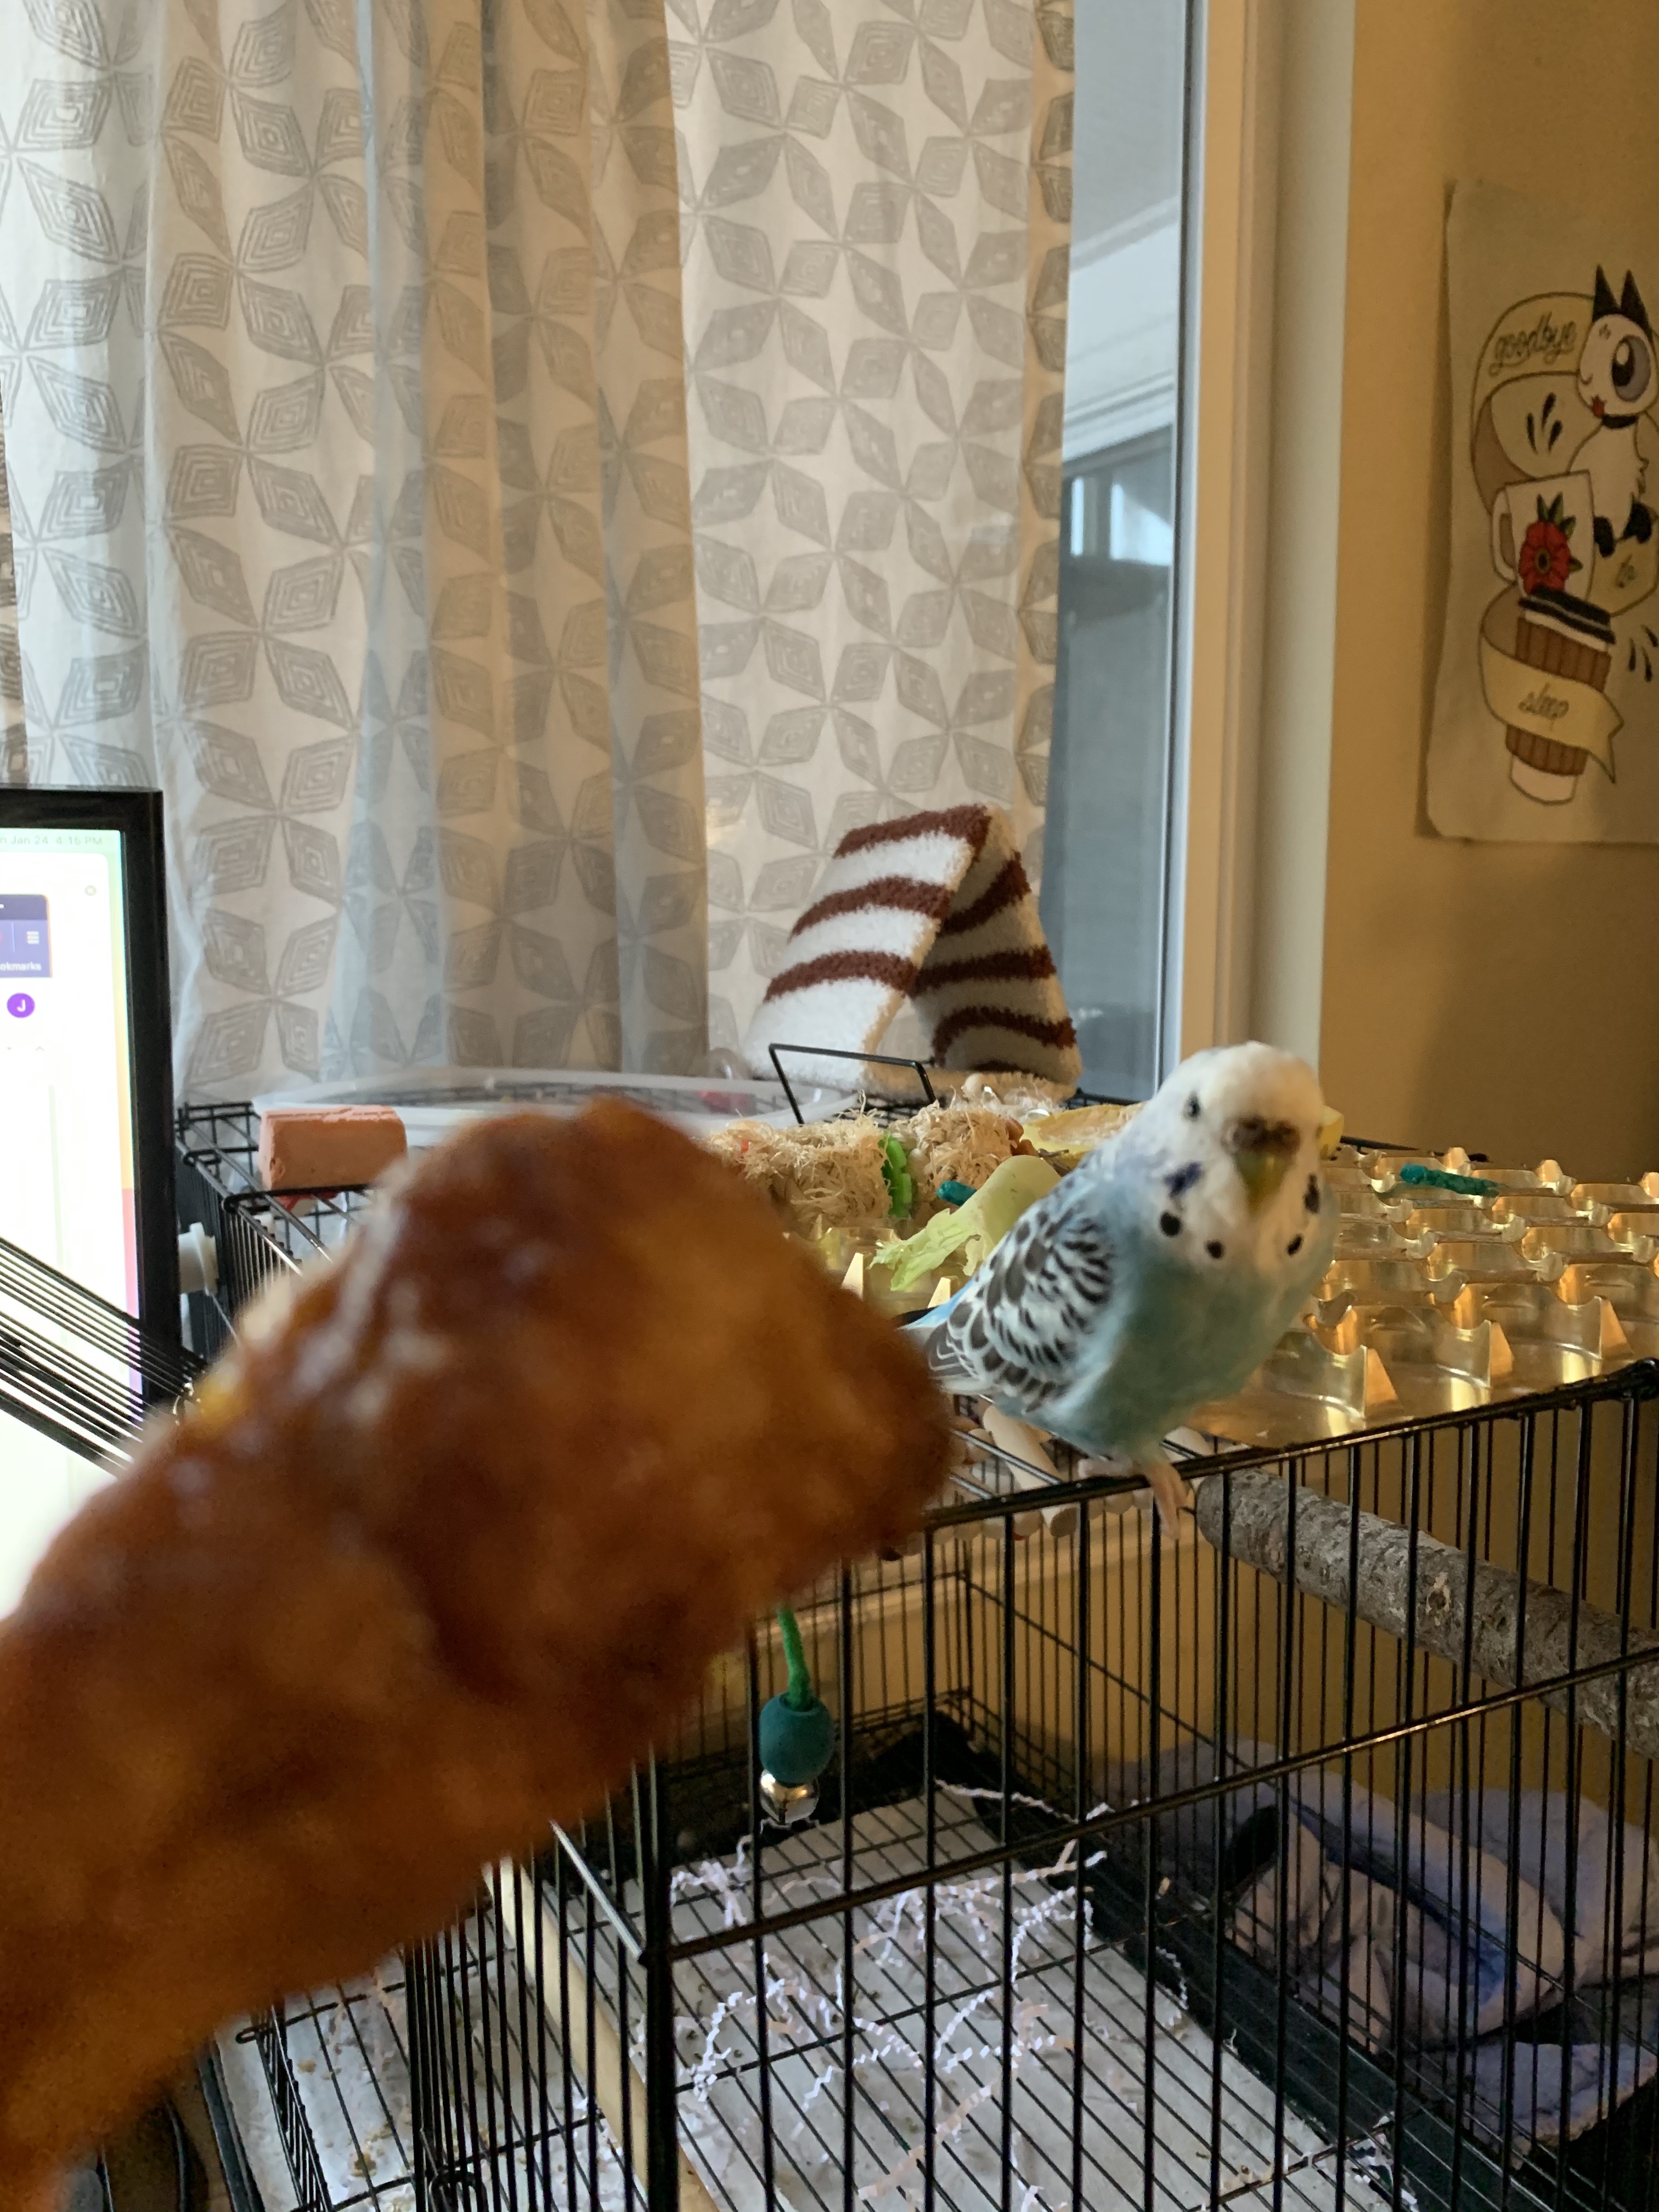 perry next to a chicken drumstick, looking uncomfortable